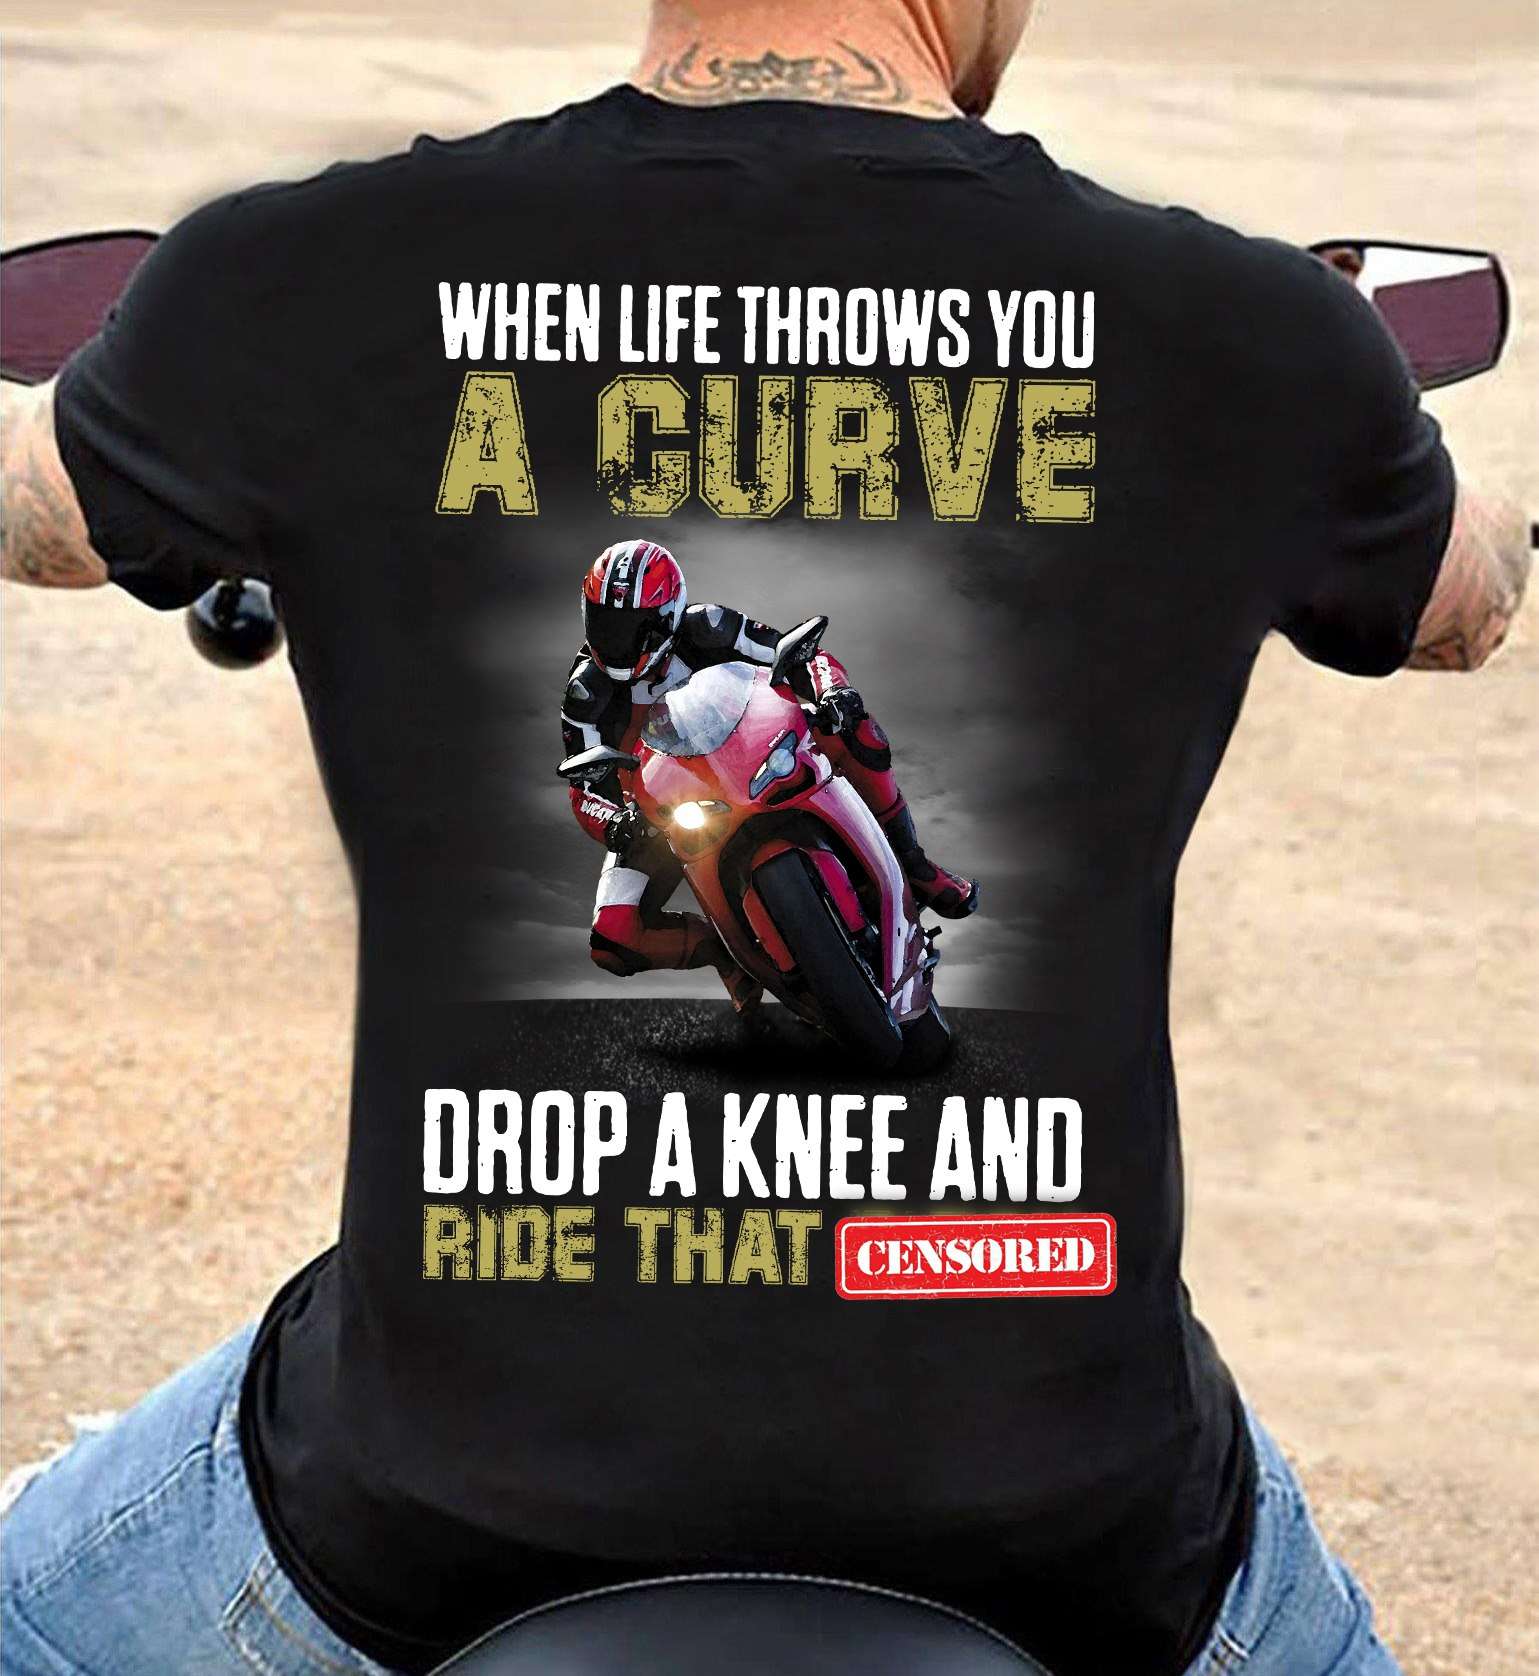 When life throws you a curve, drop a knee and ride that censored - Professional biker